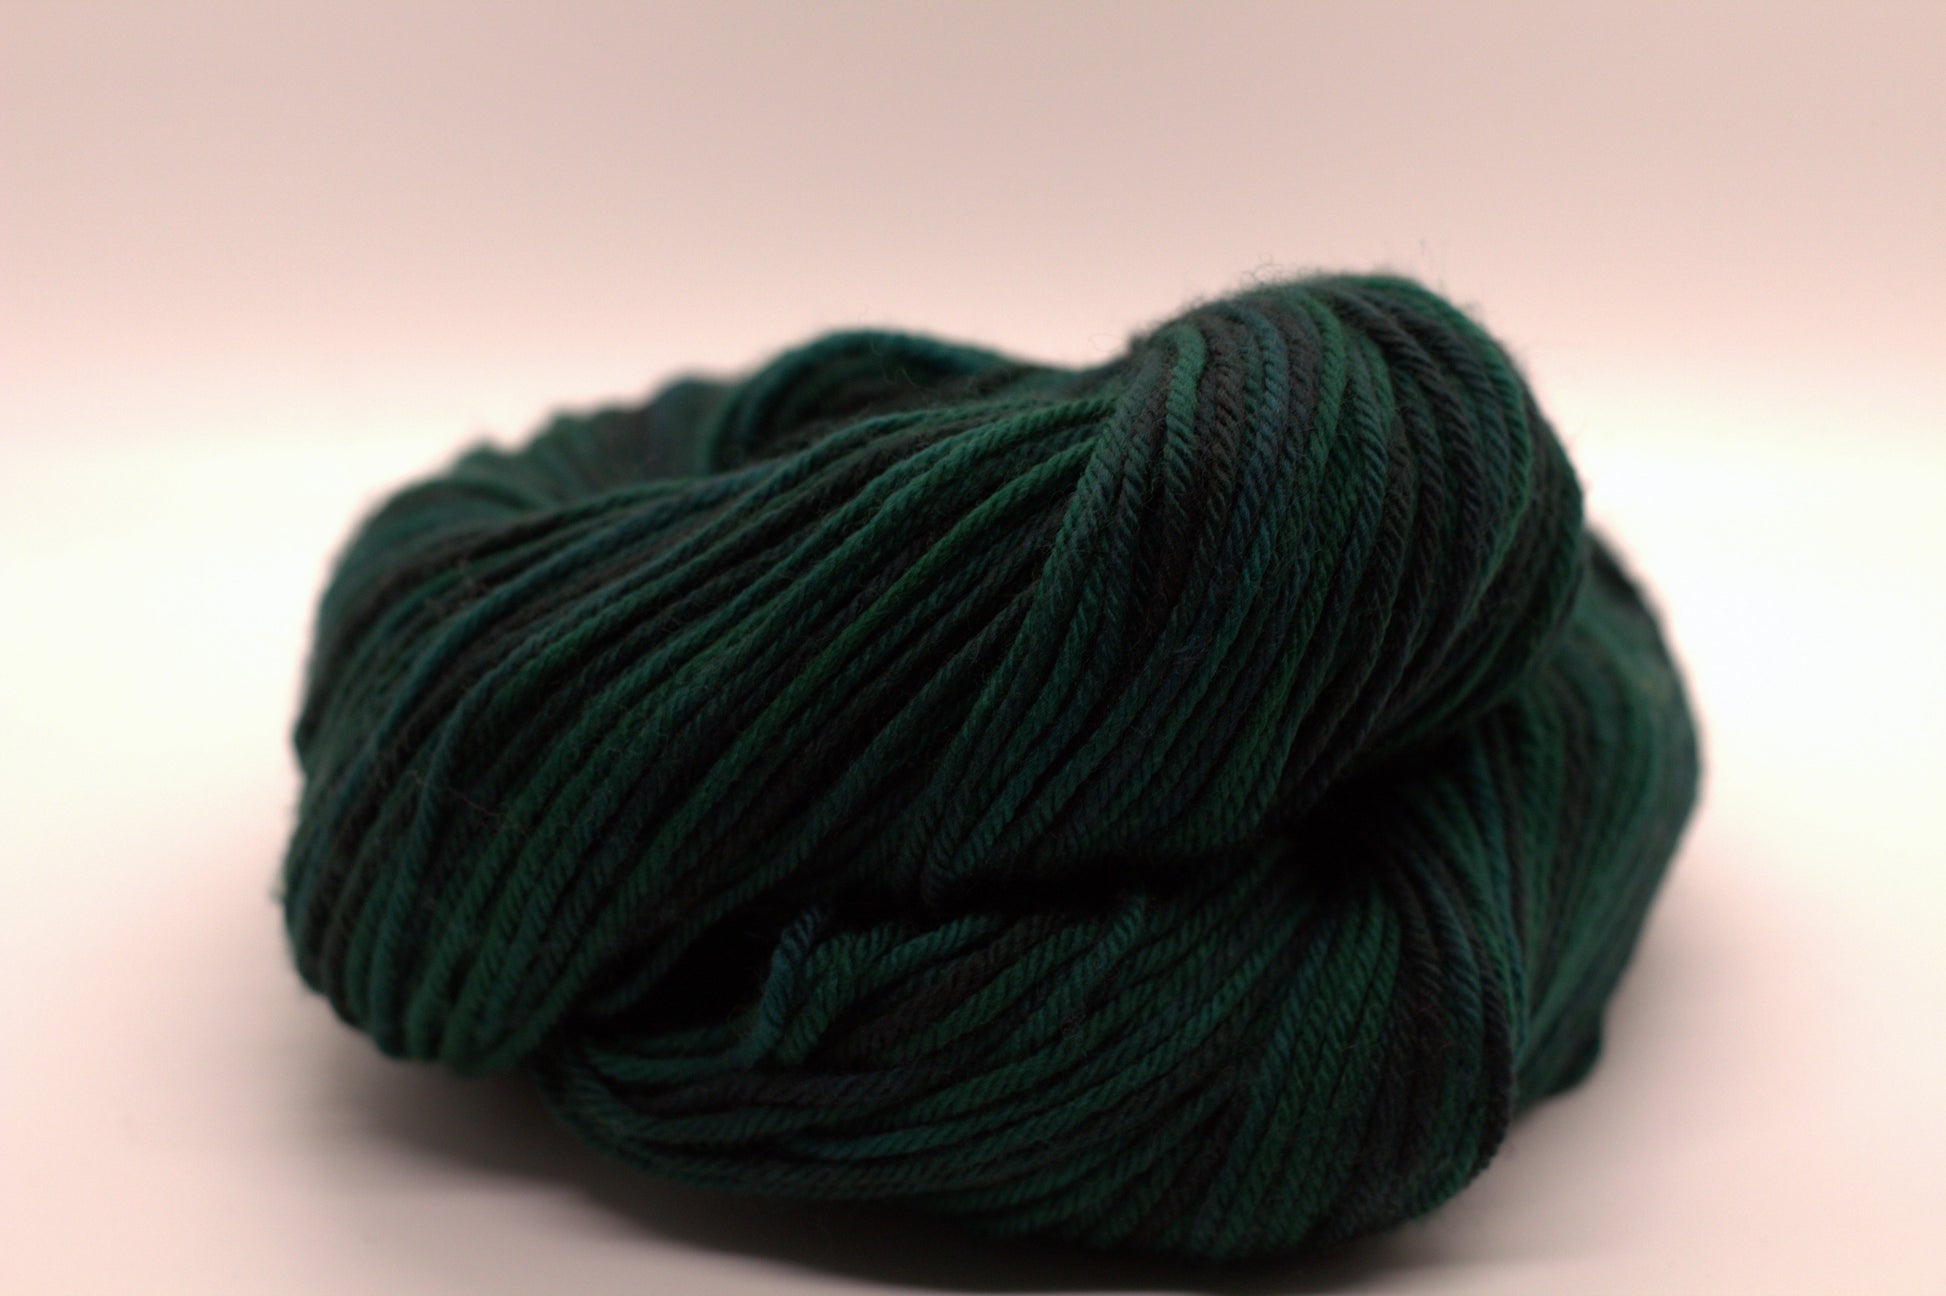 curled up skein variegated dark green and black yarn on white background.